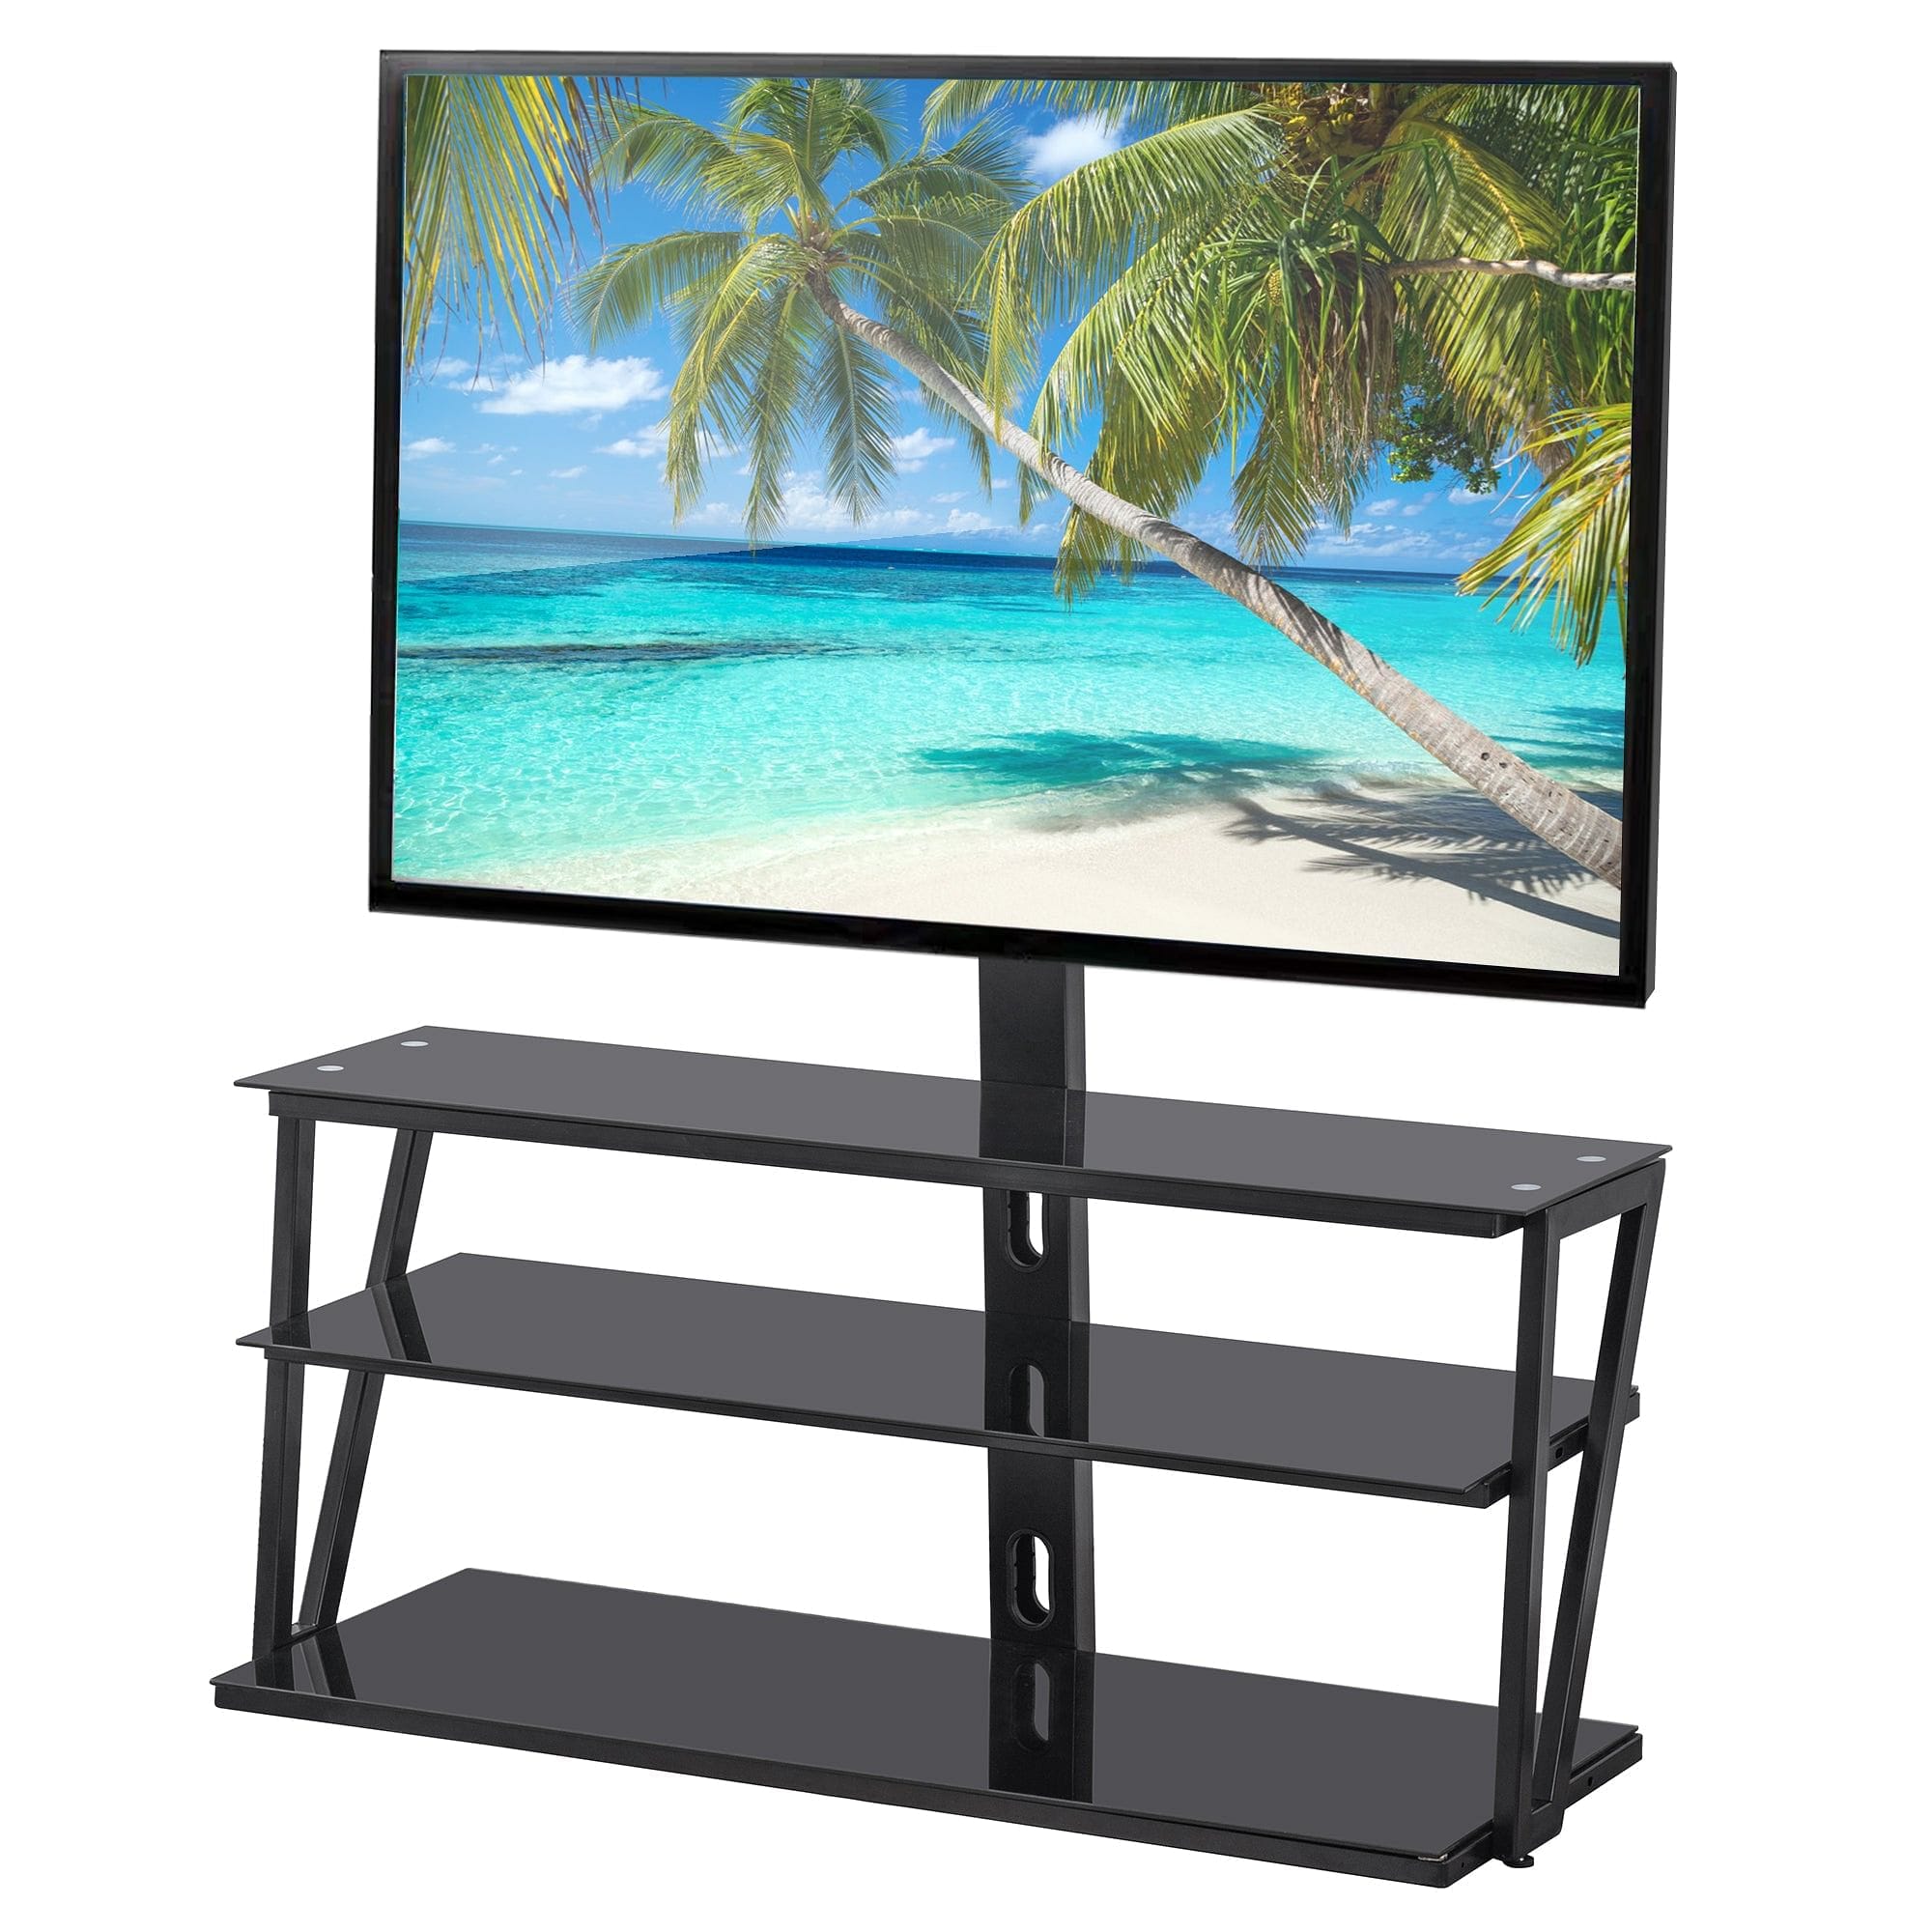 Universal Tempered Glass metal frame Three-layer glass TV Stand, Height and Angle adjustable,400*600 VESA for 32~65 inch TVCan Accommodate Various electronic devices, PS4,DVD,Game Console.